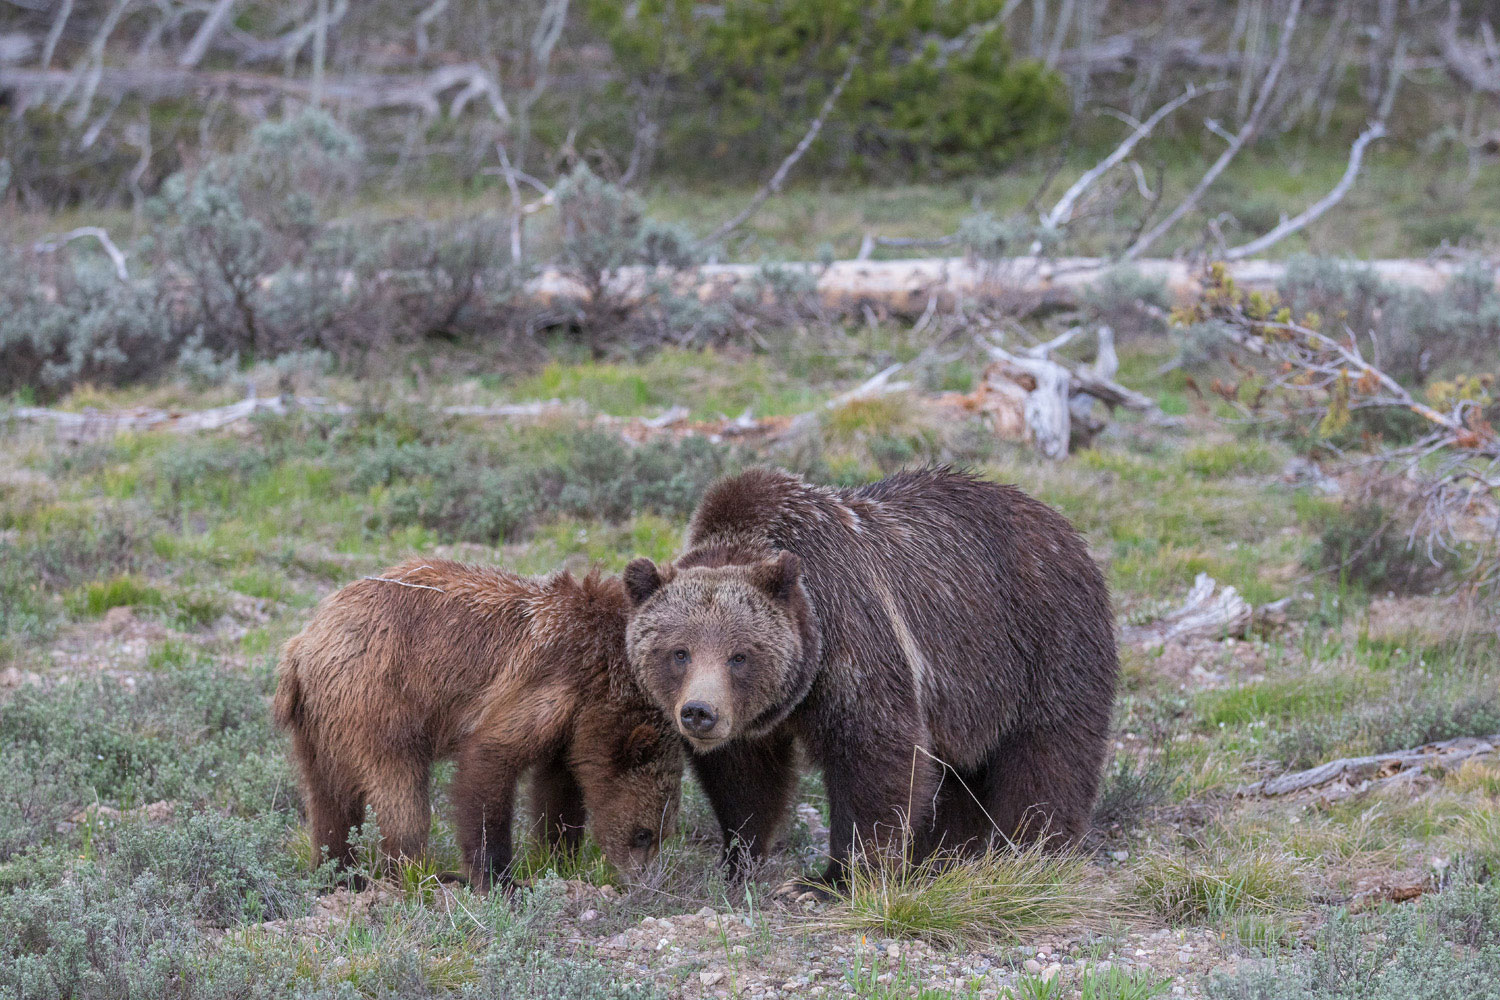 Grizzly 399 takes a wary glance as her cubs nonchalantly enjoy the security of her protection.